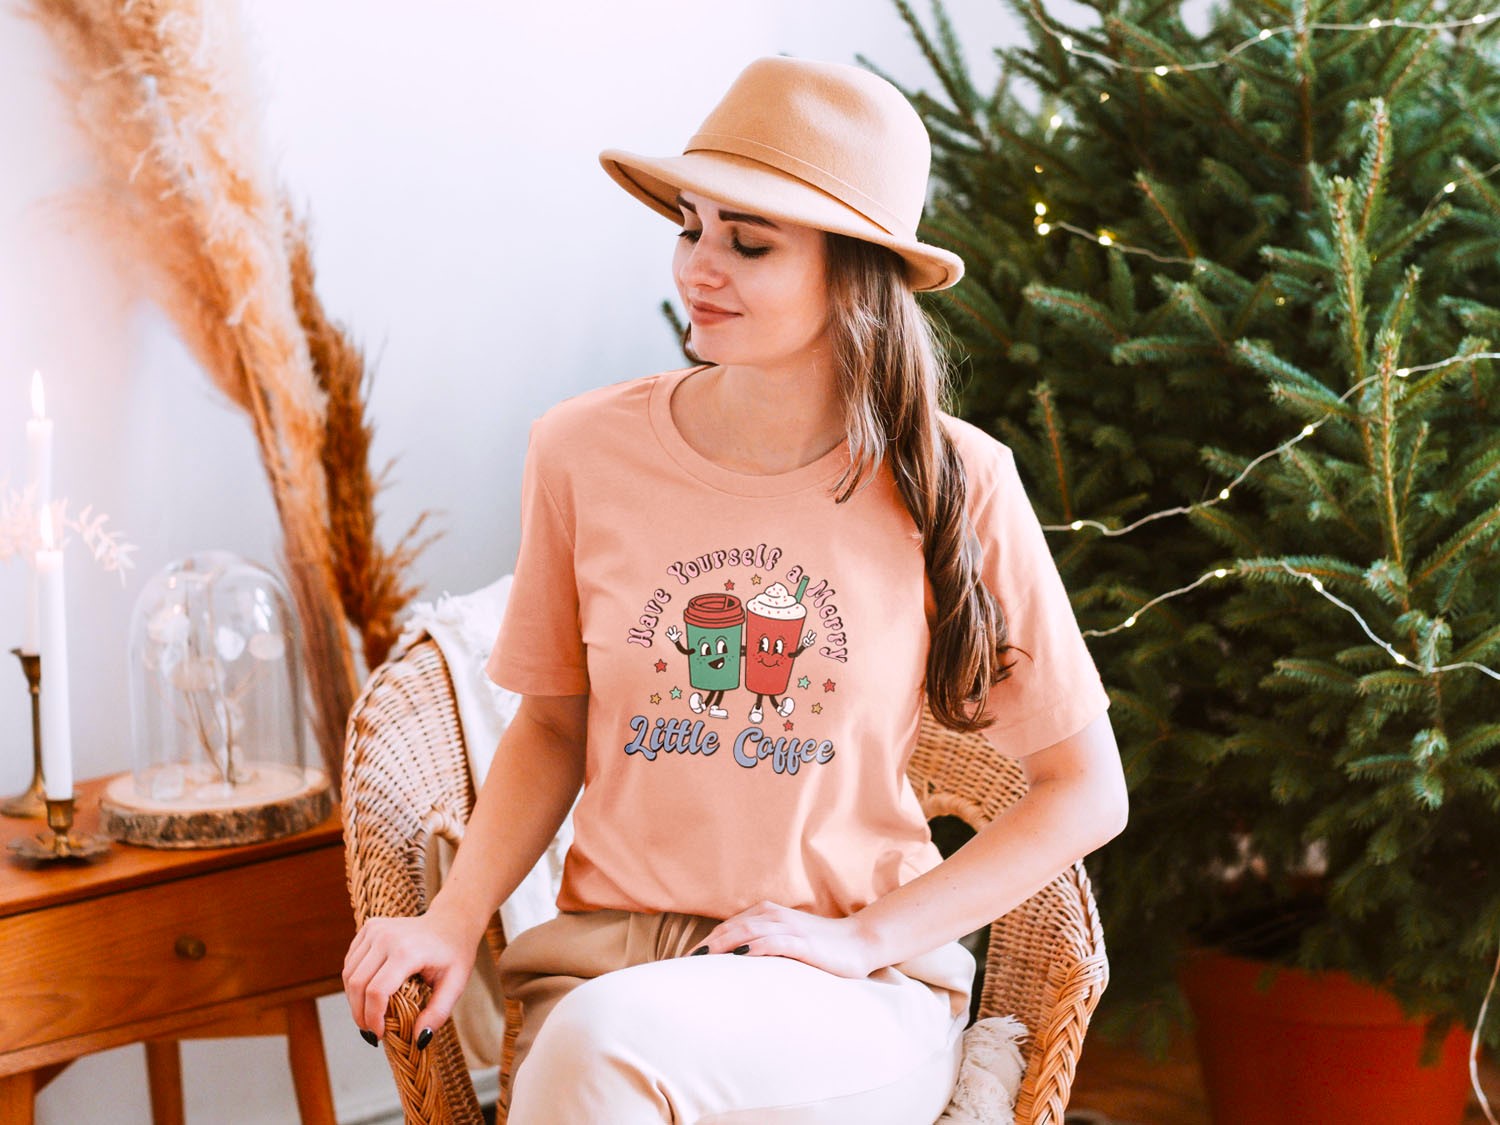 Have Yourself A Merry Little Coffee T-shirt - Christmas Winter Retro Vintage Design Printed Tee Shirt